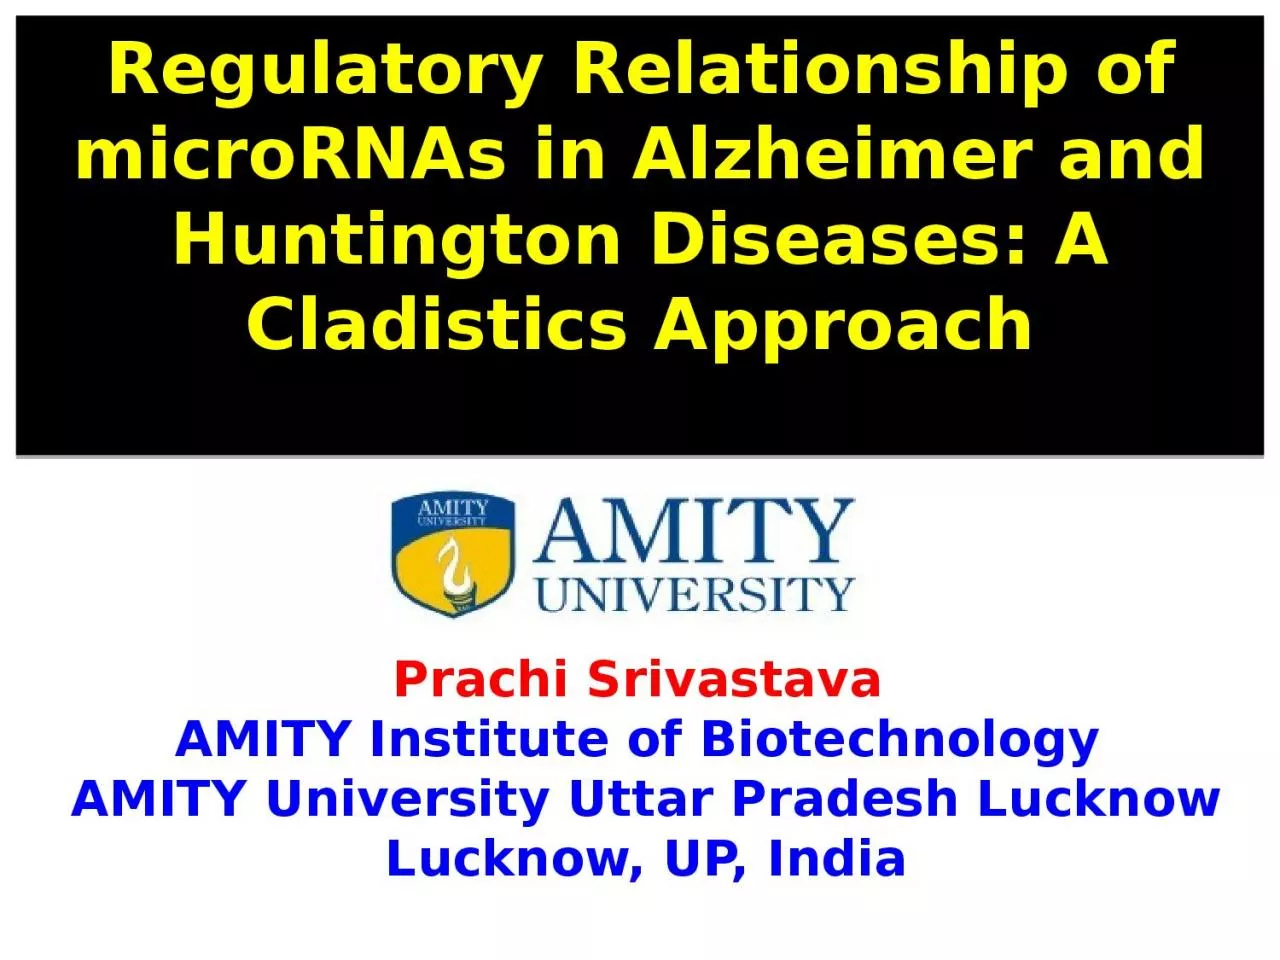 Regulatory Relationship of microRNAs in Alzheimer and Huntington Diseases: A Cladistics